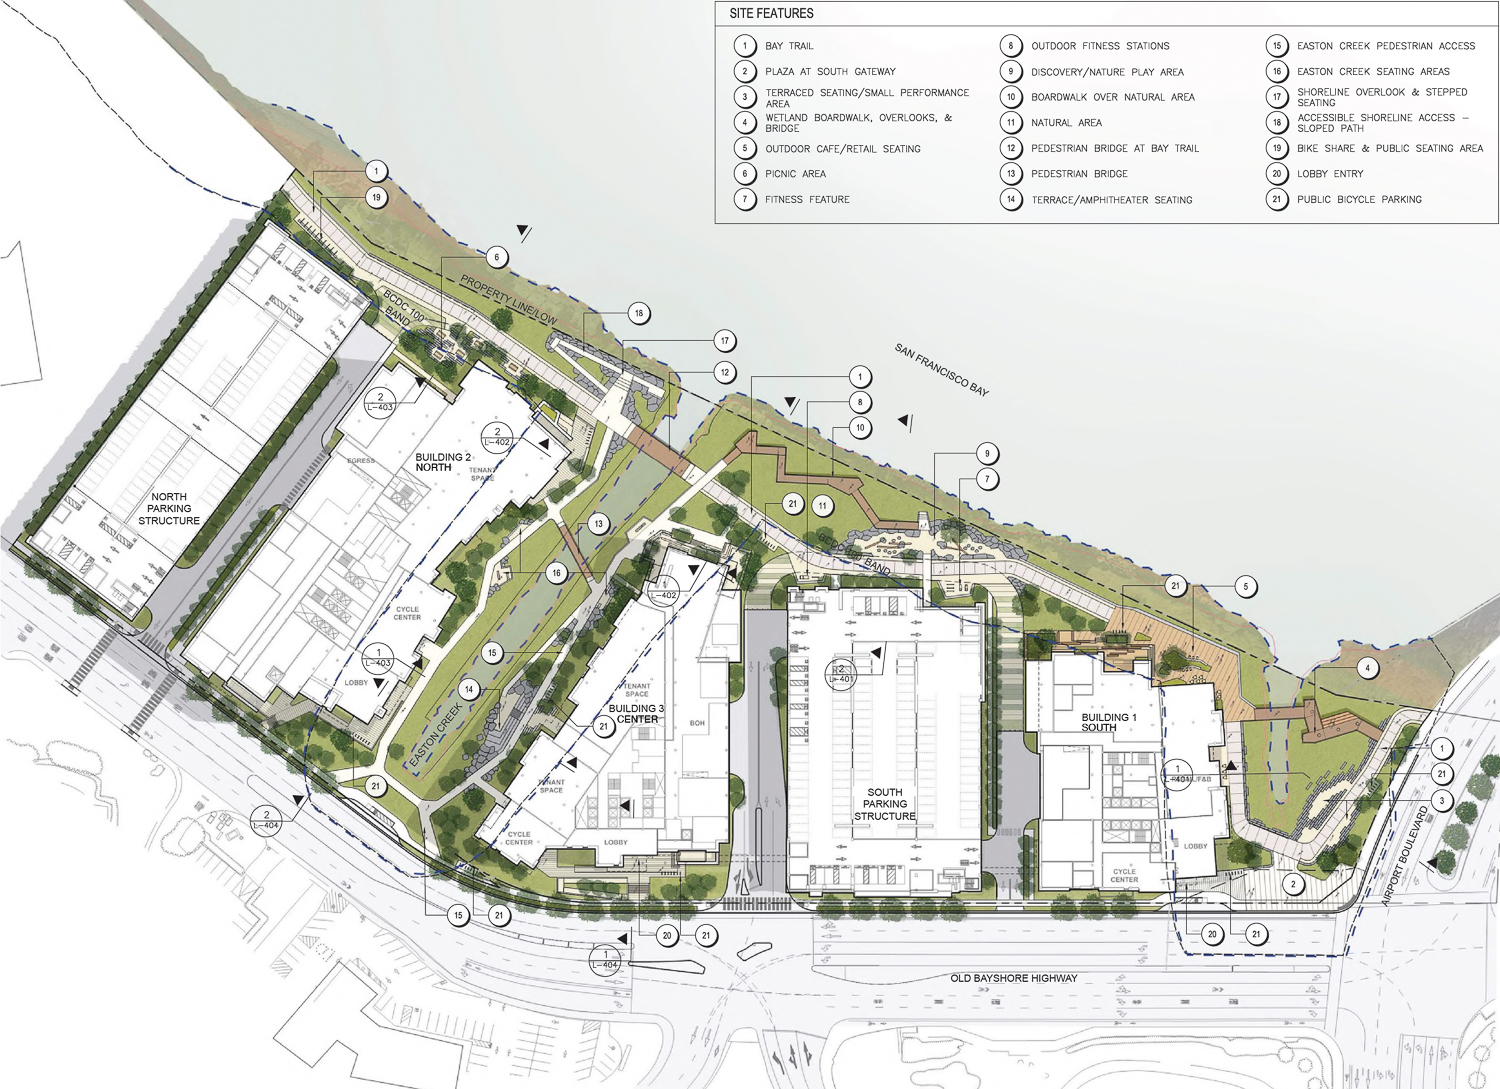 1200-1340 Bayshore Highway landscaping site map, illustration by CMG